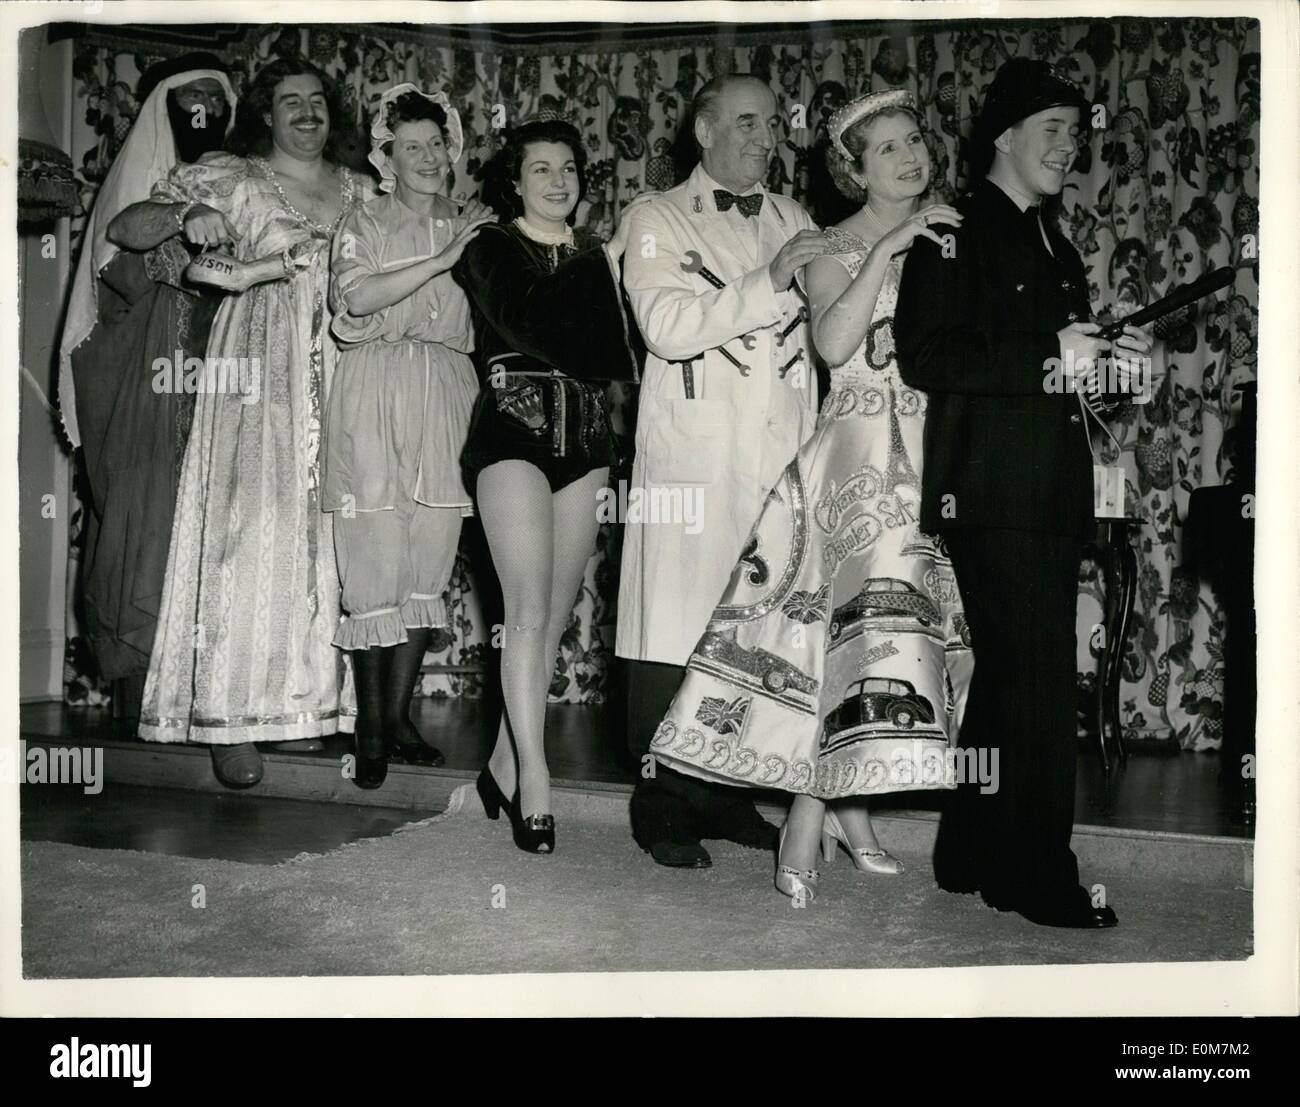 Jan. 01, 1954 - The Dockers attend New Year Ball introducing the ''Daimler'' dress.: Quite a sensation was created at the New Years Eve Fancy Dress Ball at the Poole Harbour Yacht Club by the unique dress worn by Lady Docker. The dress is white slipper satin embossed with diamante and sequins to represent every make of Daimler car. Photo shows Lance the son of Sir Bernard and Lady Docker leads the ''Conga'' followed by his mother wearing the ''Daimler Dress'' and his father as a ''Garage Hand'' and other guests at the ball. Stock Photo